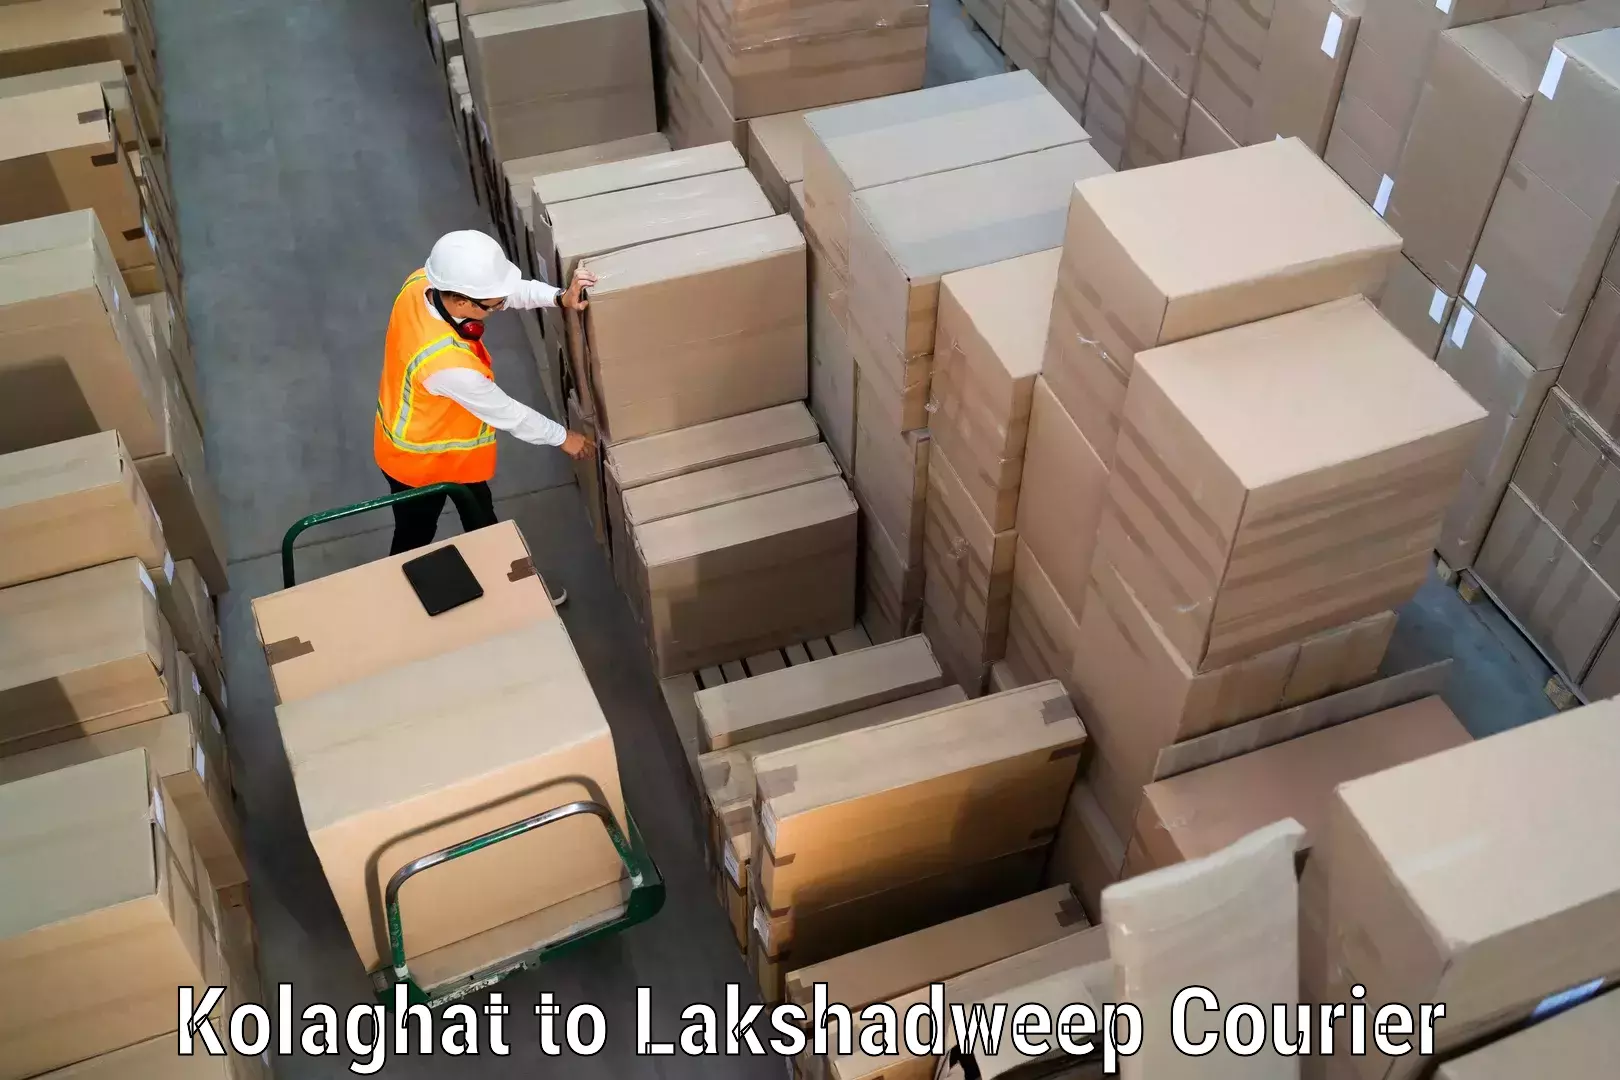 Premium courier services Kolaghat to Lakshadweep